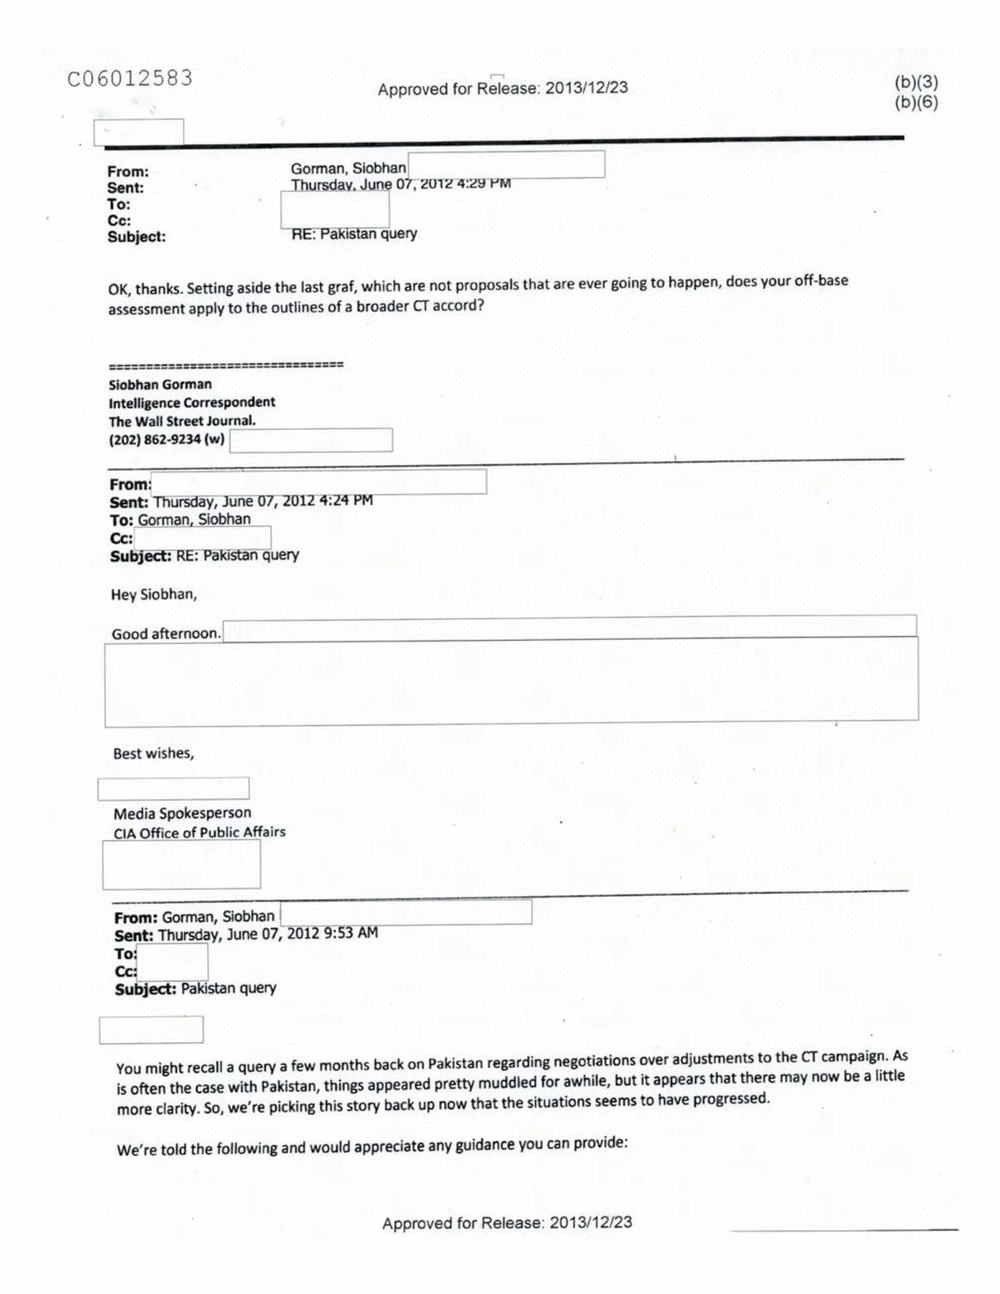 Page 125 from Email Correspondence Between Reporters and CIA Flacks